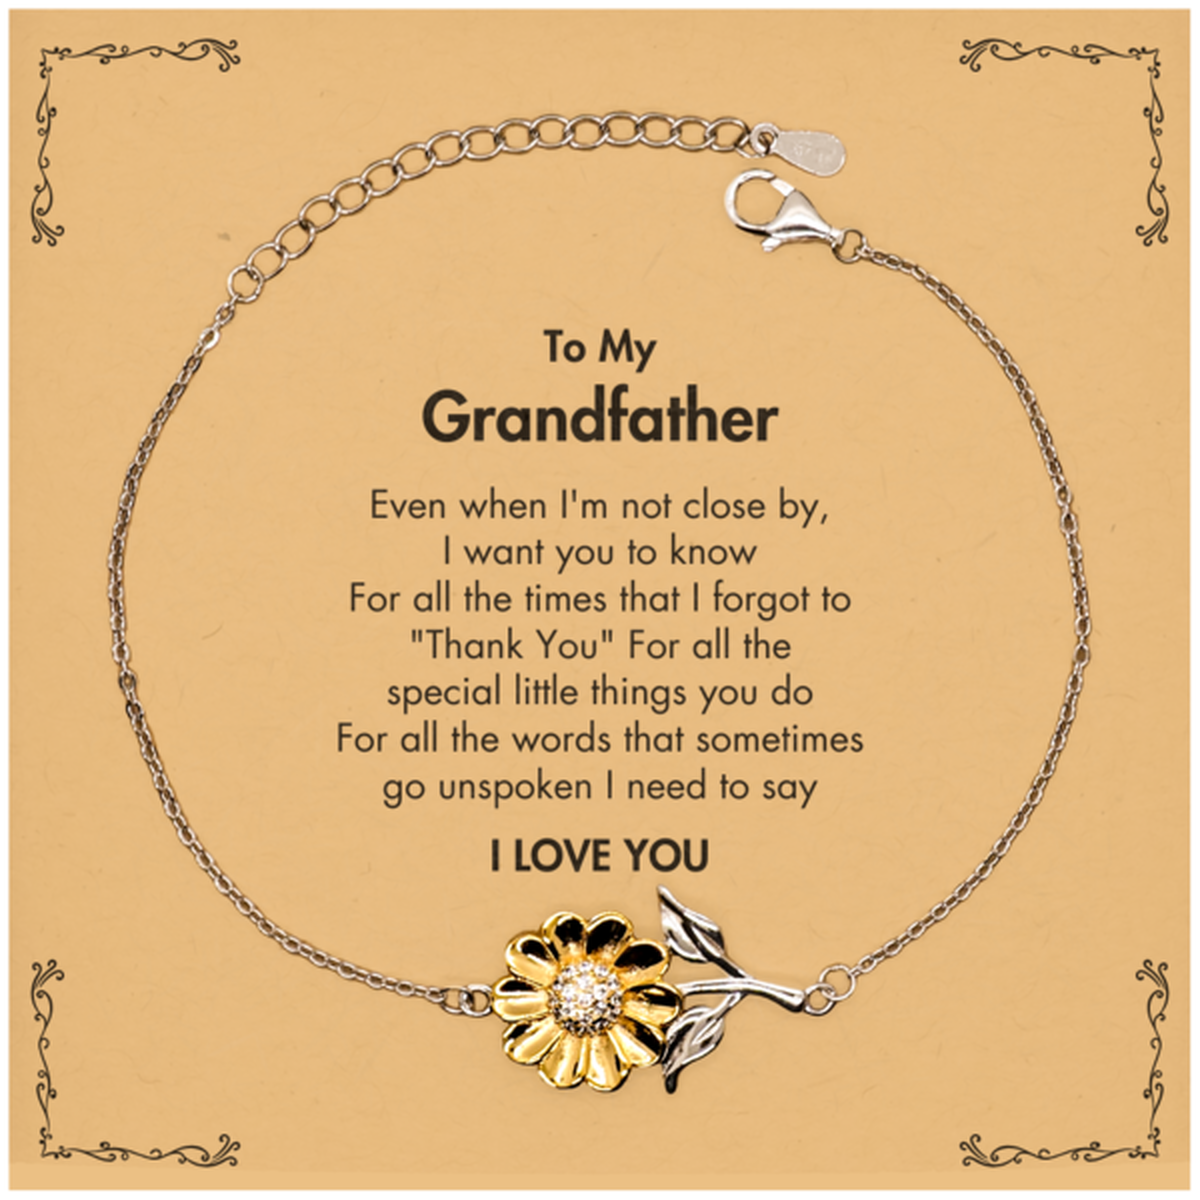 Thank You Gifts for Grandfather, Keepsake Sunflower Bracelet Gifts for Grandfather Birthday Mother's day Father's Day Grandfather For all the words That sometimes go unspoken I need to say I LOVE YOU